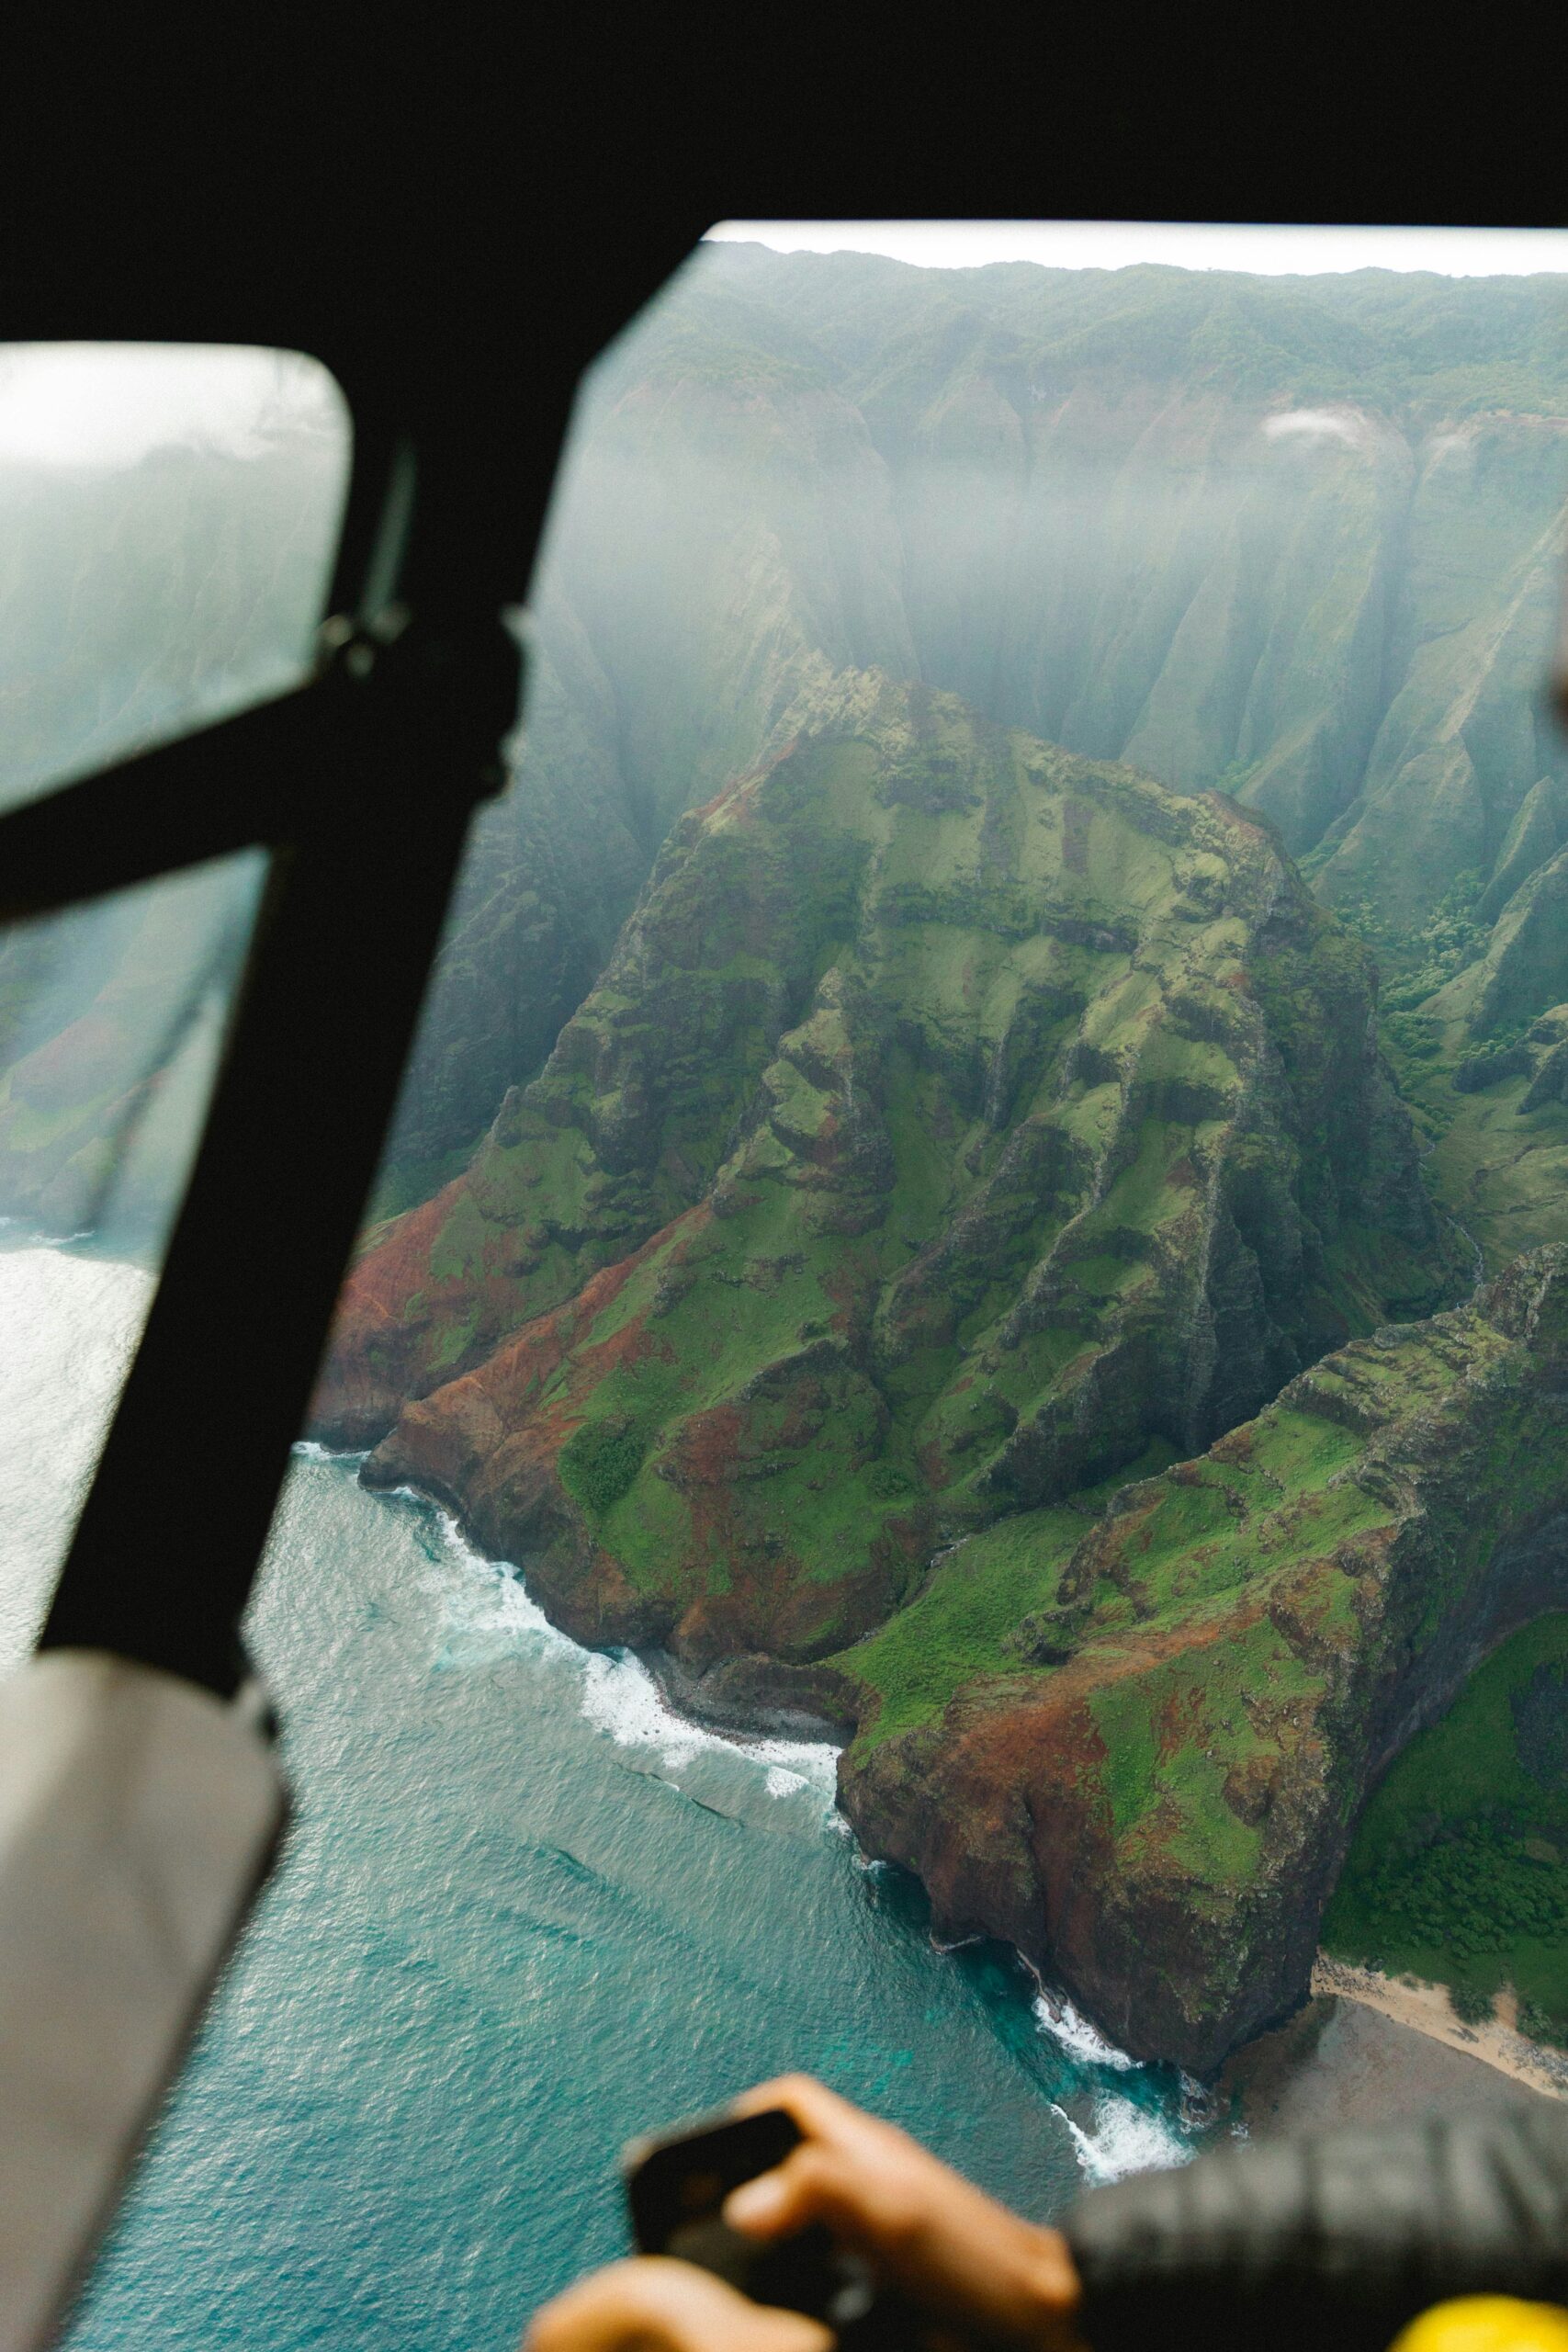 How Dangerous Is A Helicopter Ride In Hawaii?